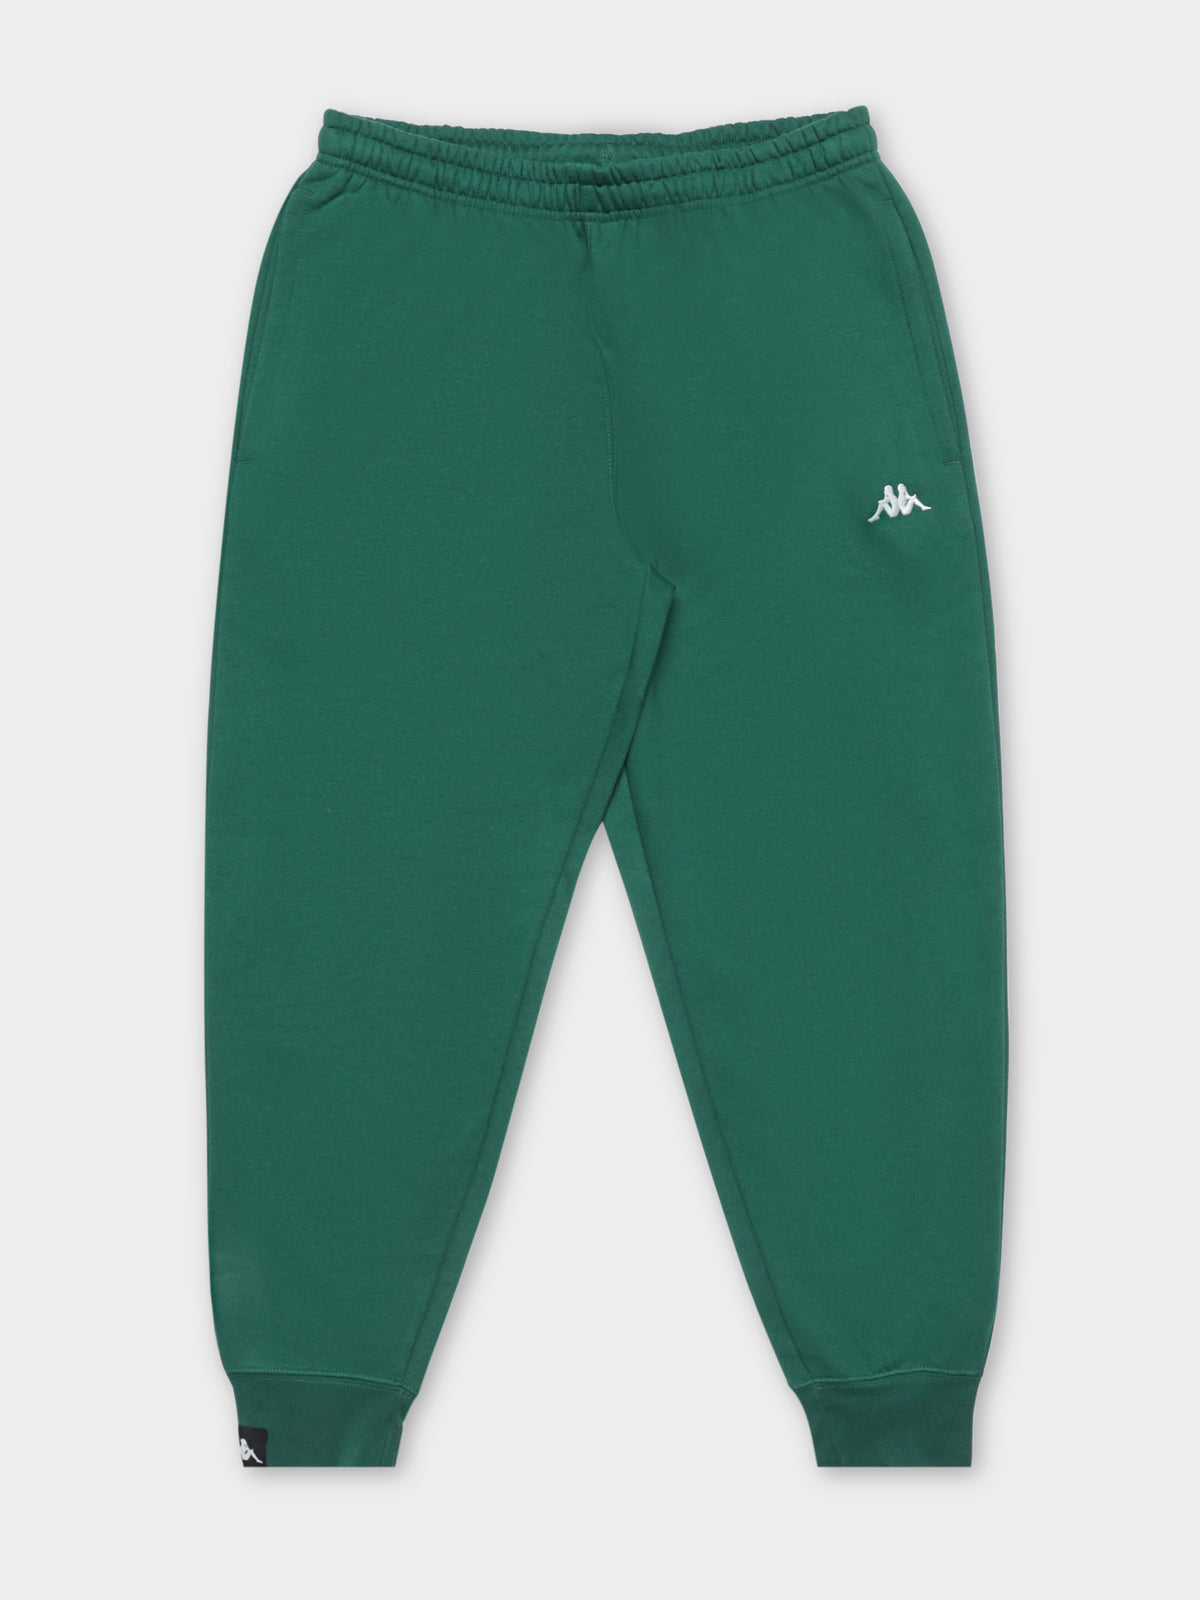 Authentic Scar Track Pants in Green